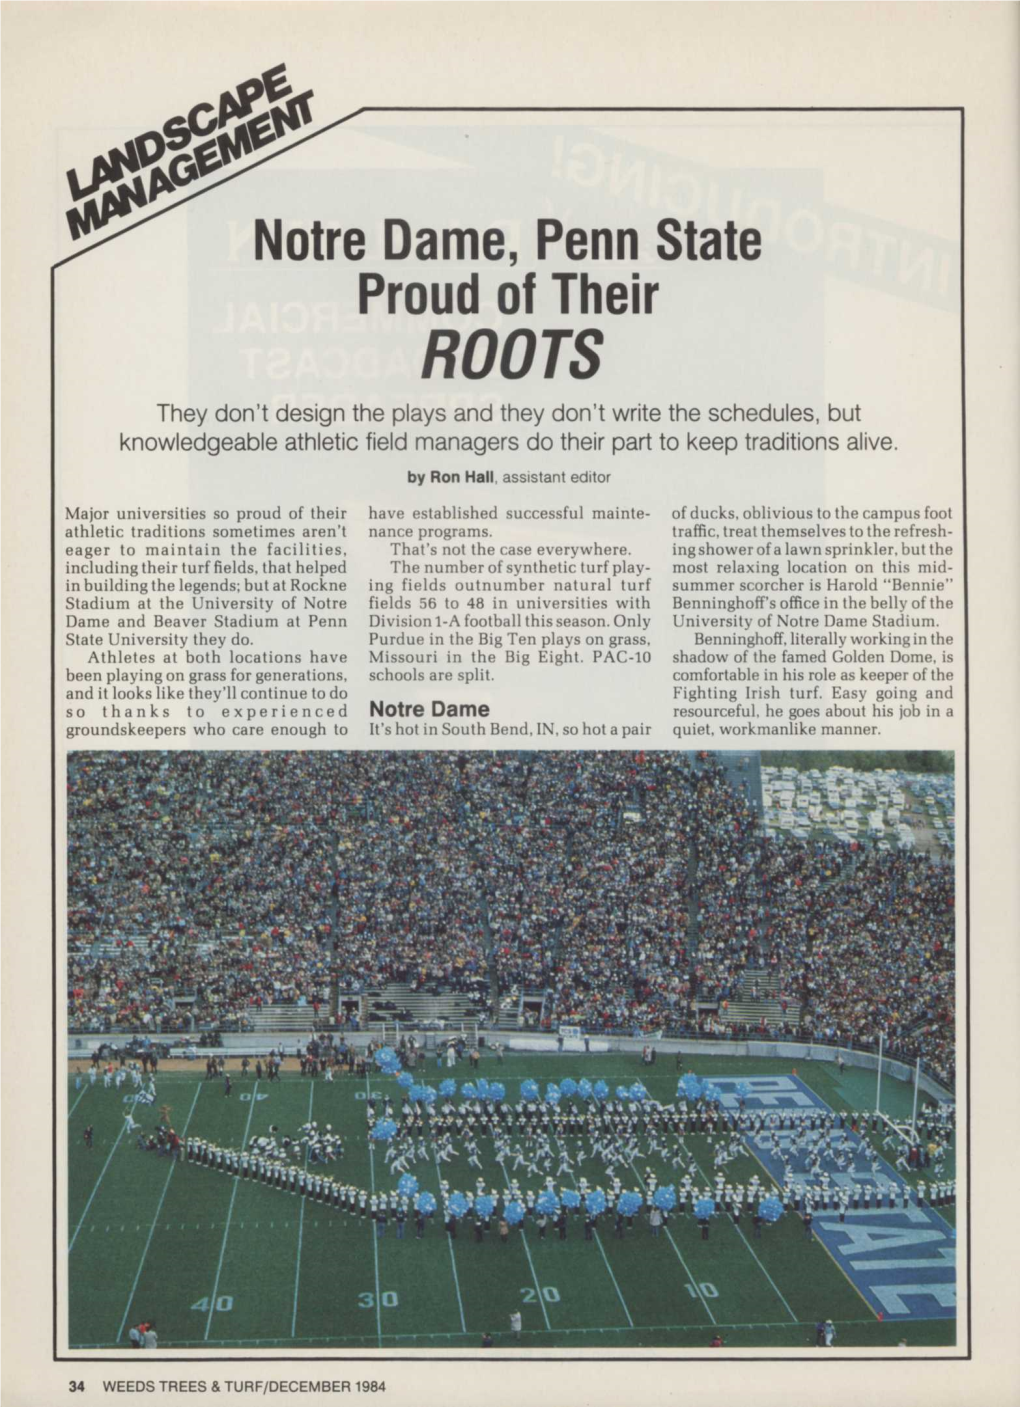 Notre Dame, Penn State Proud of Their ROOTS They Don't Design the Plays and They Don't Write the Schedules, But